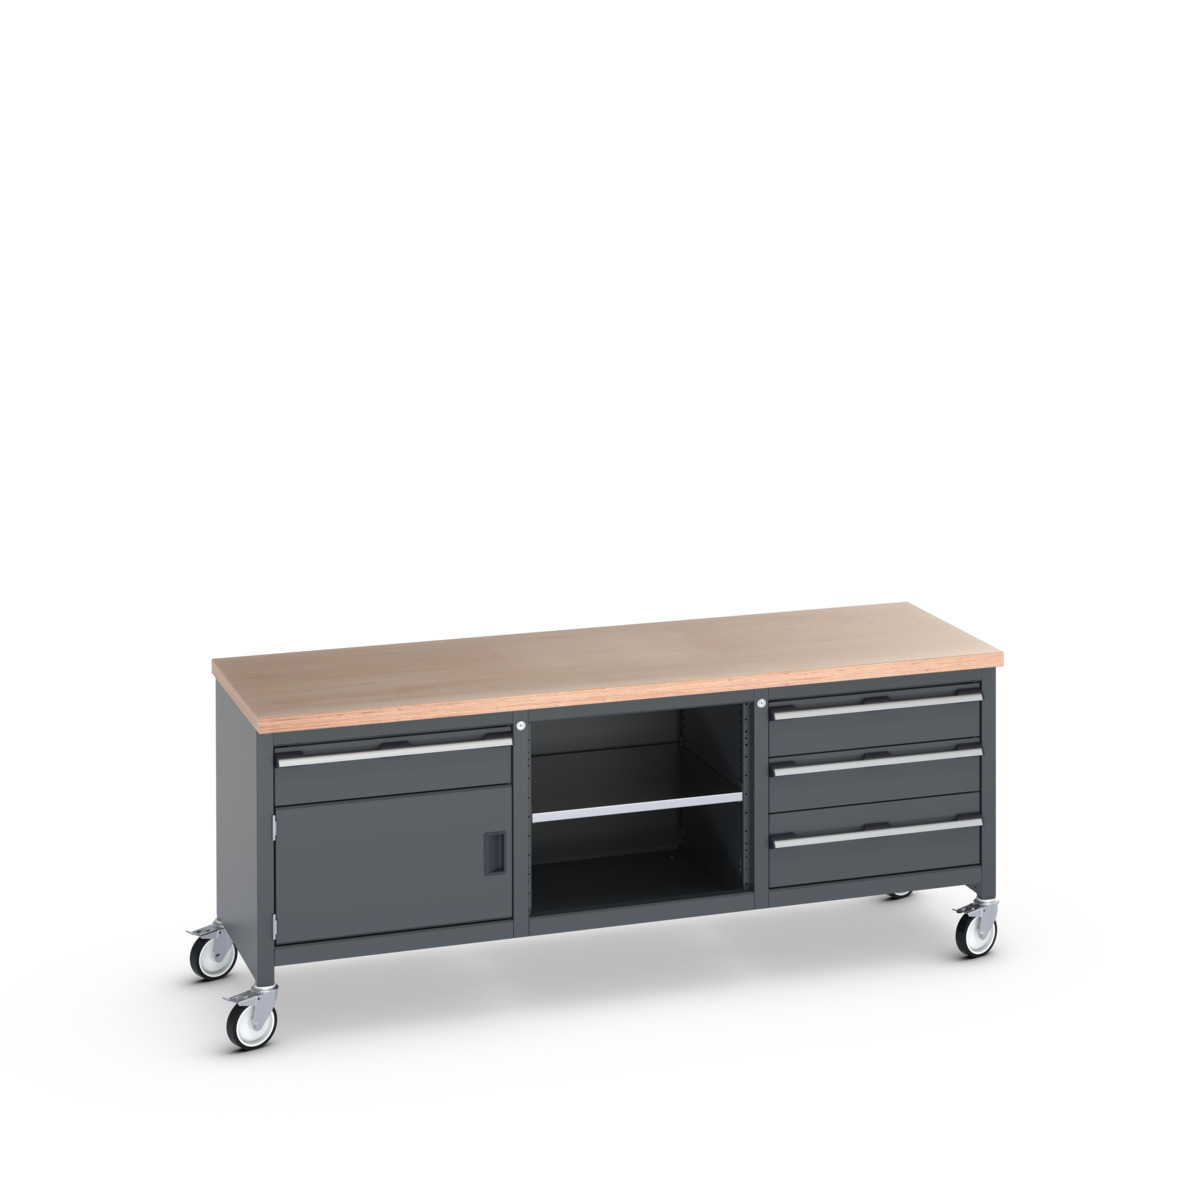 41002127.77V - cubio mobile storage bench (mpx)